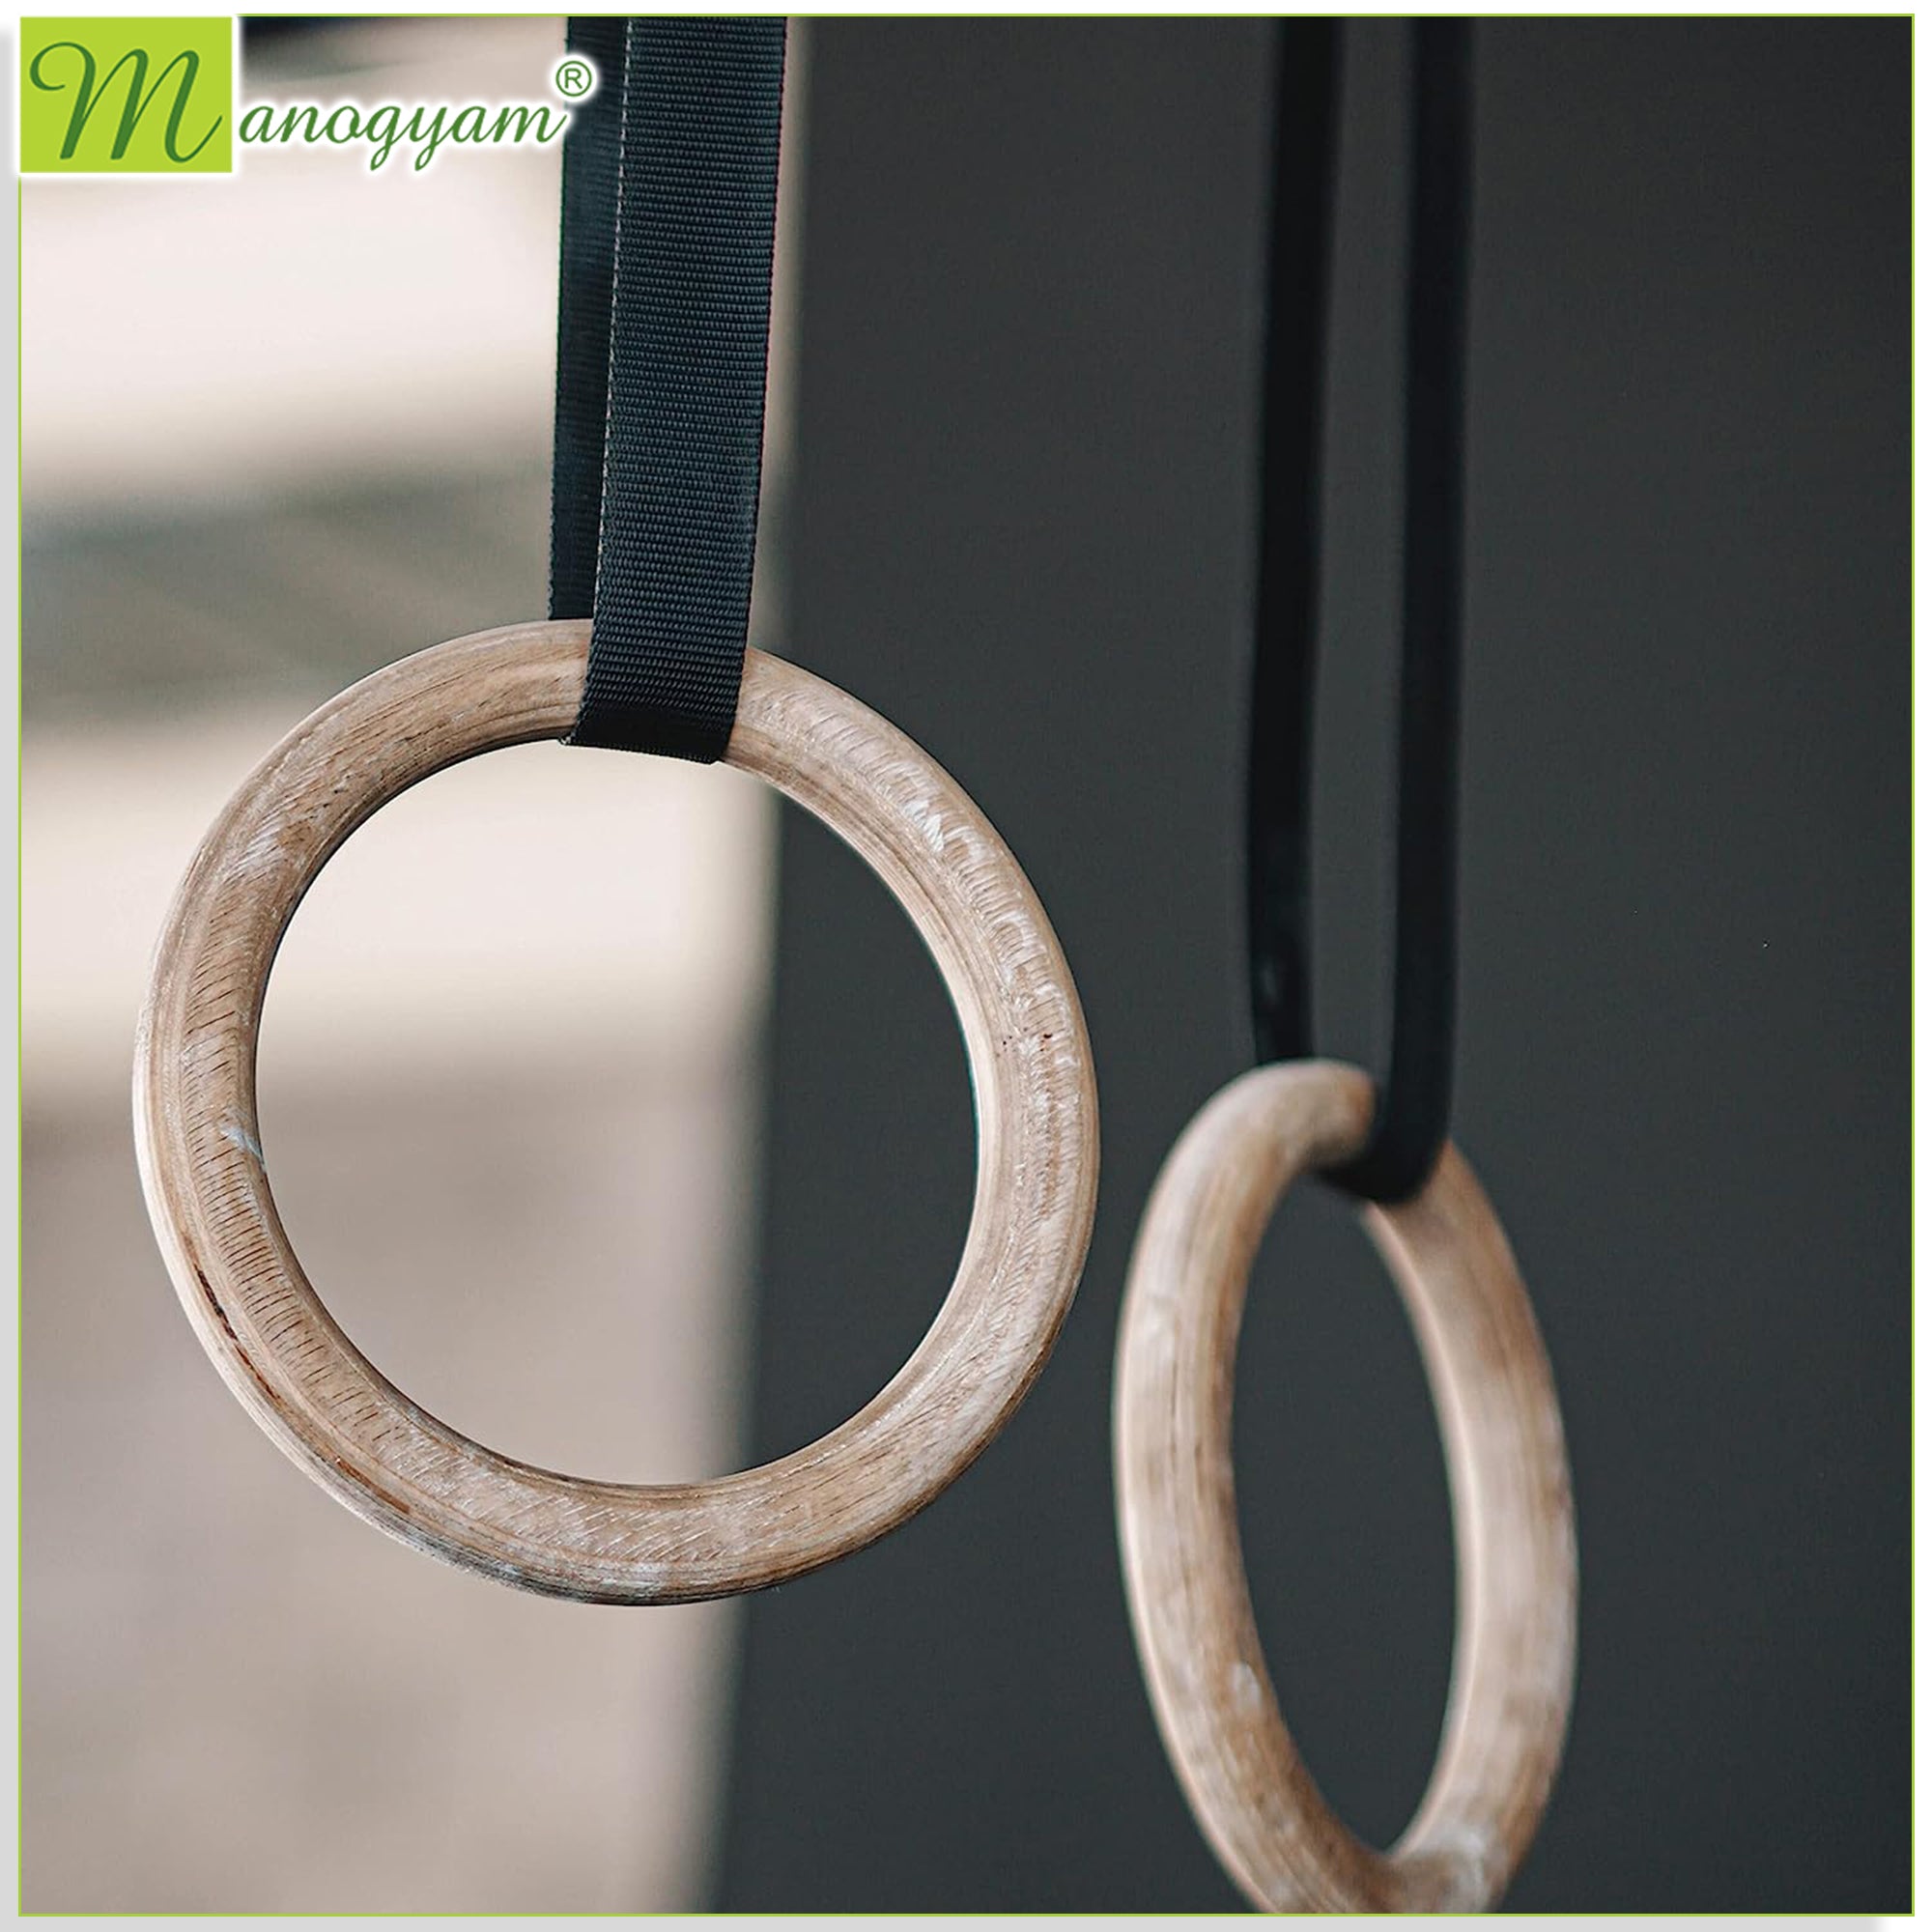 Gymnastic Roman Rings - Best Quality & Affordable Wood Rings for Exercise